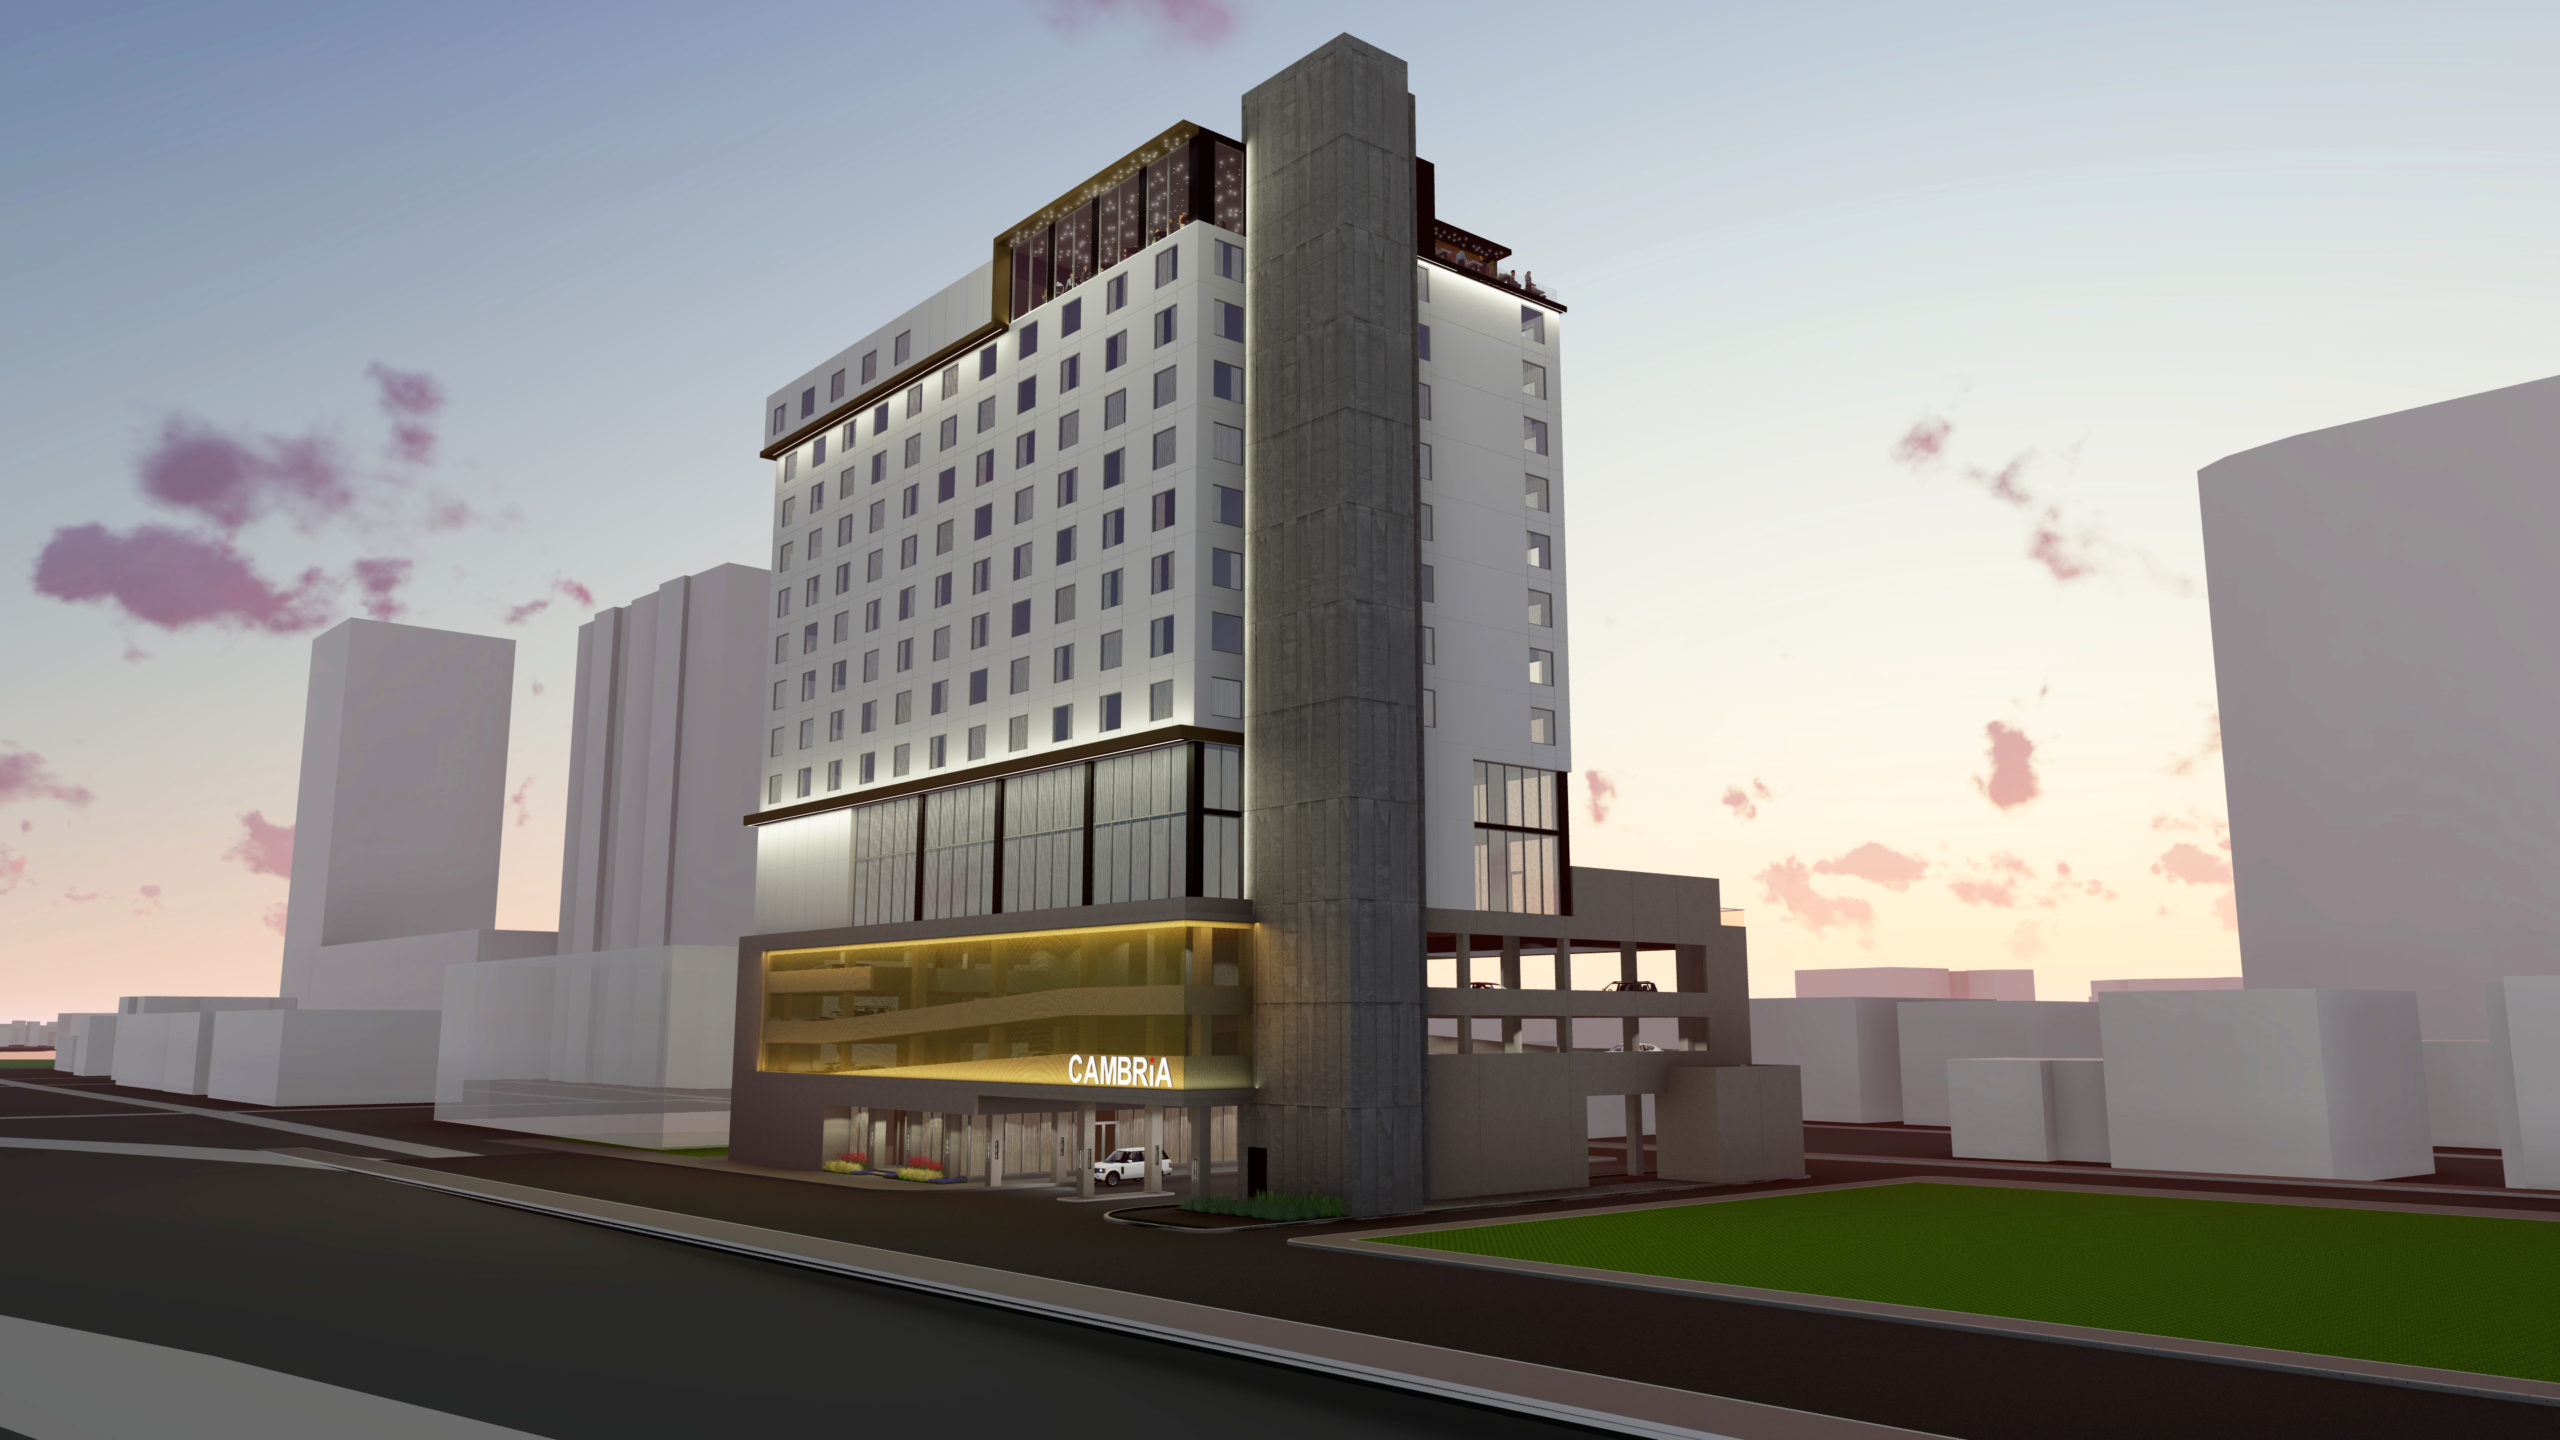 Story Cambria Hotel Project Breaks Ground In The Rainey Street